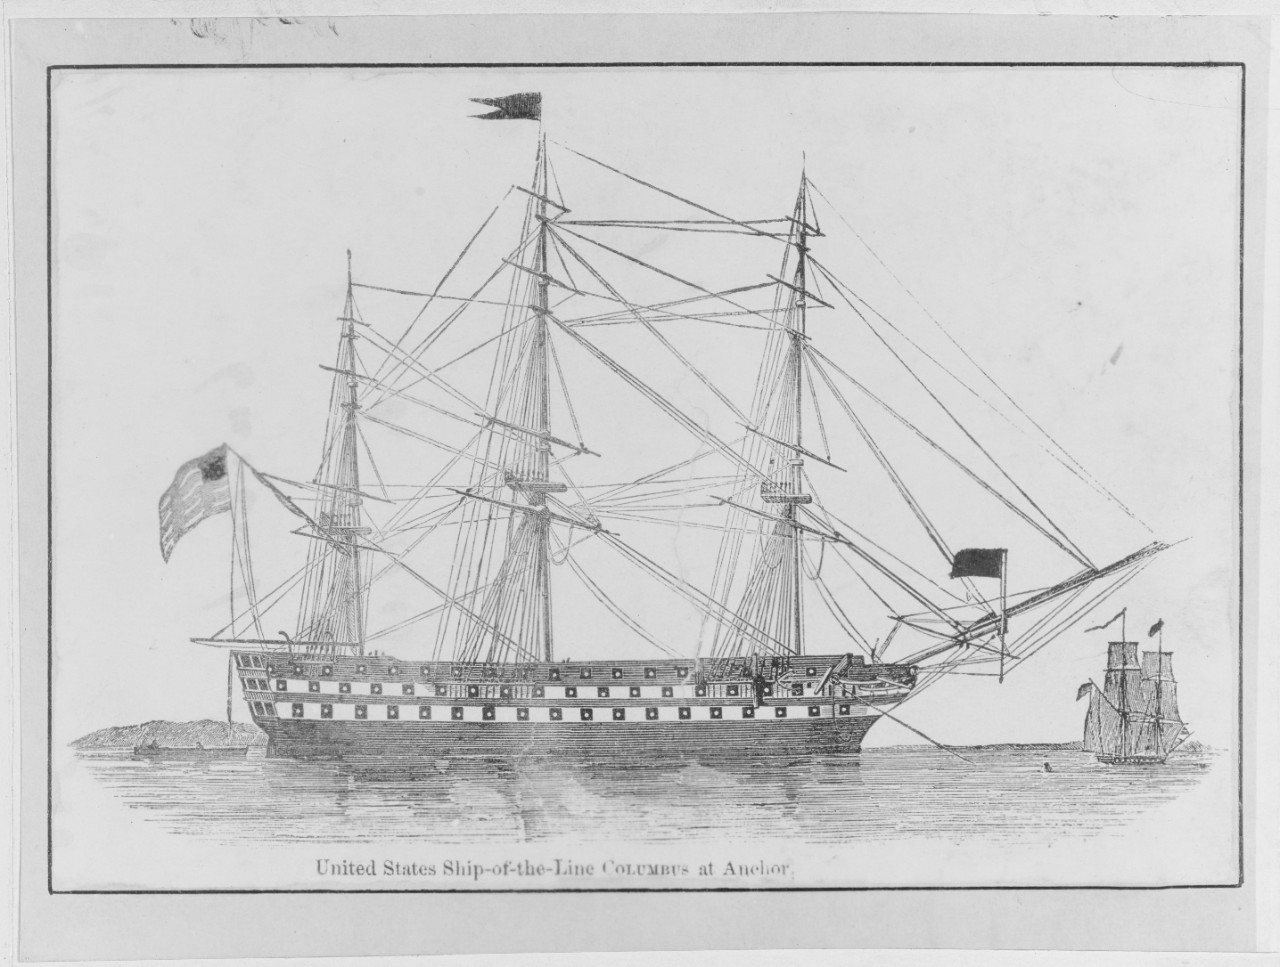 United States Ship-of-the-line "COLUMBUS" at anchor